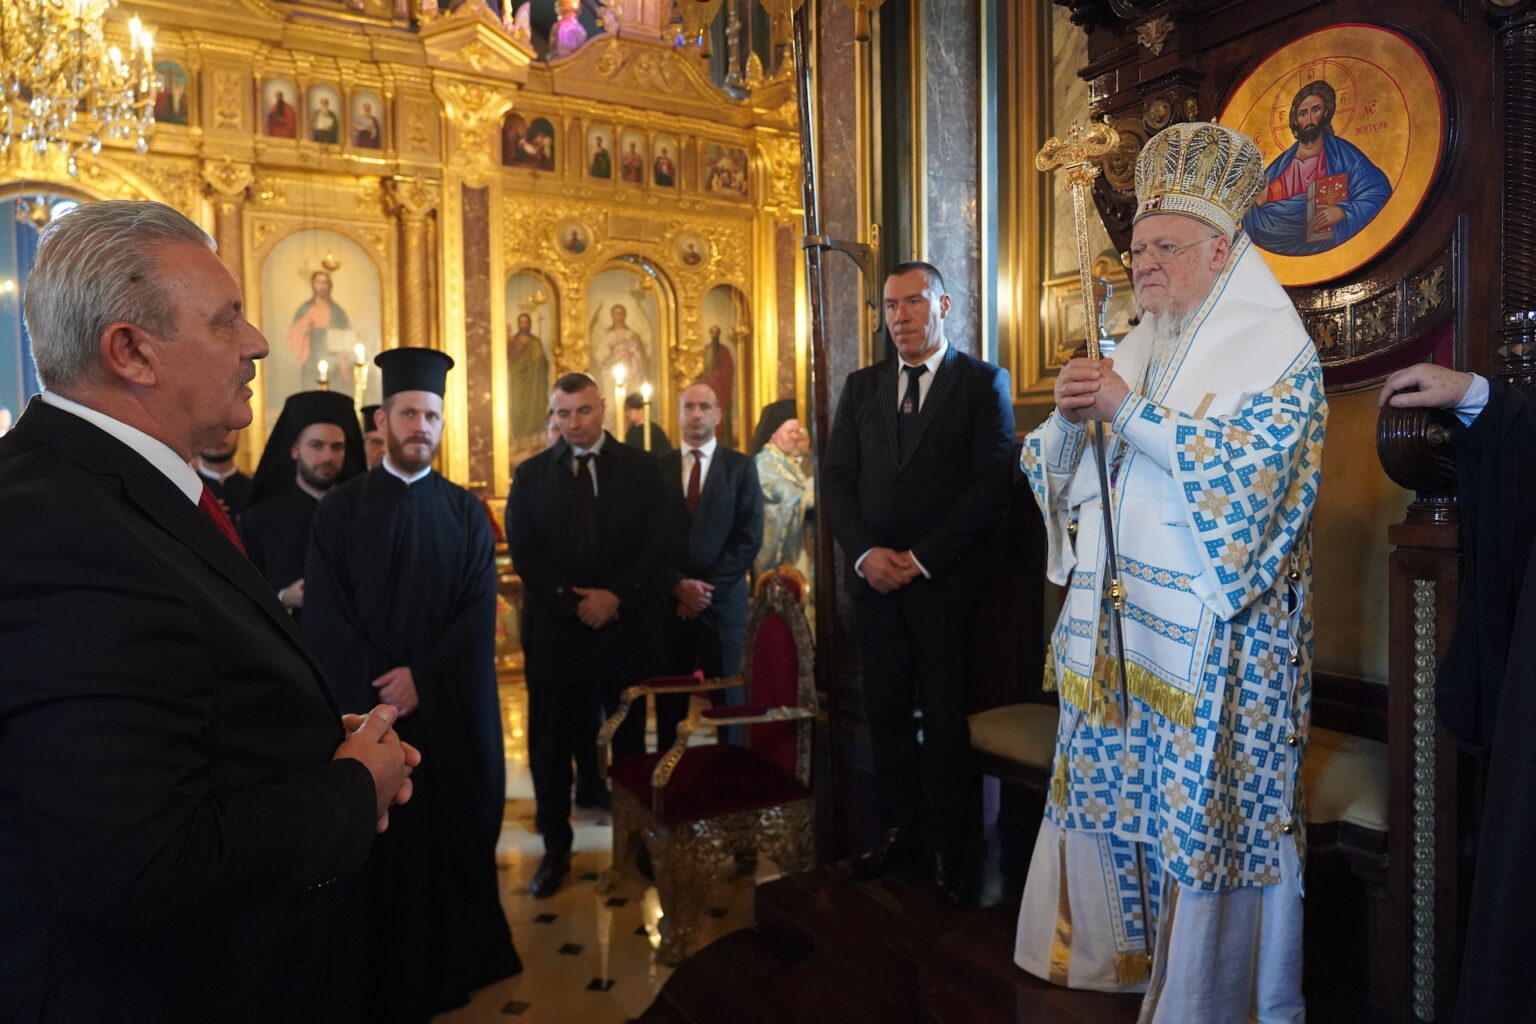 Ecumenical Patriarch Bartholomew: “Let us walk together in unity in all aspects of ecclesiastical life”